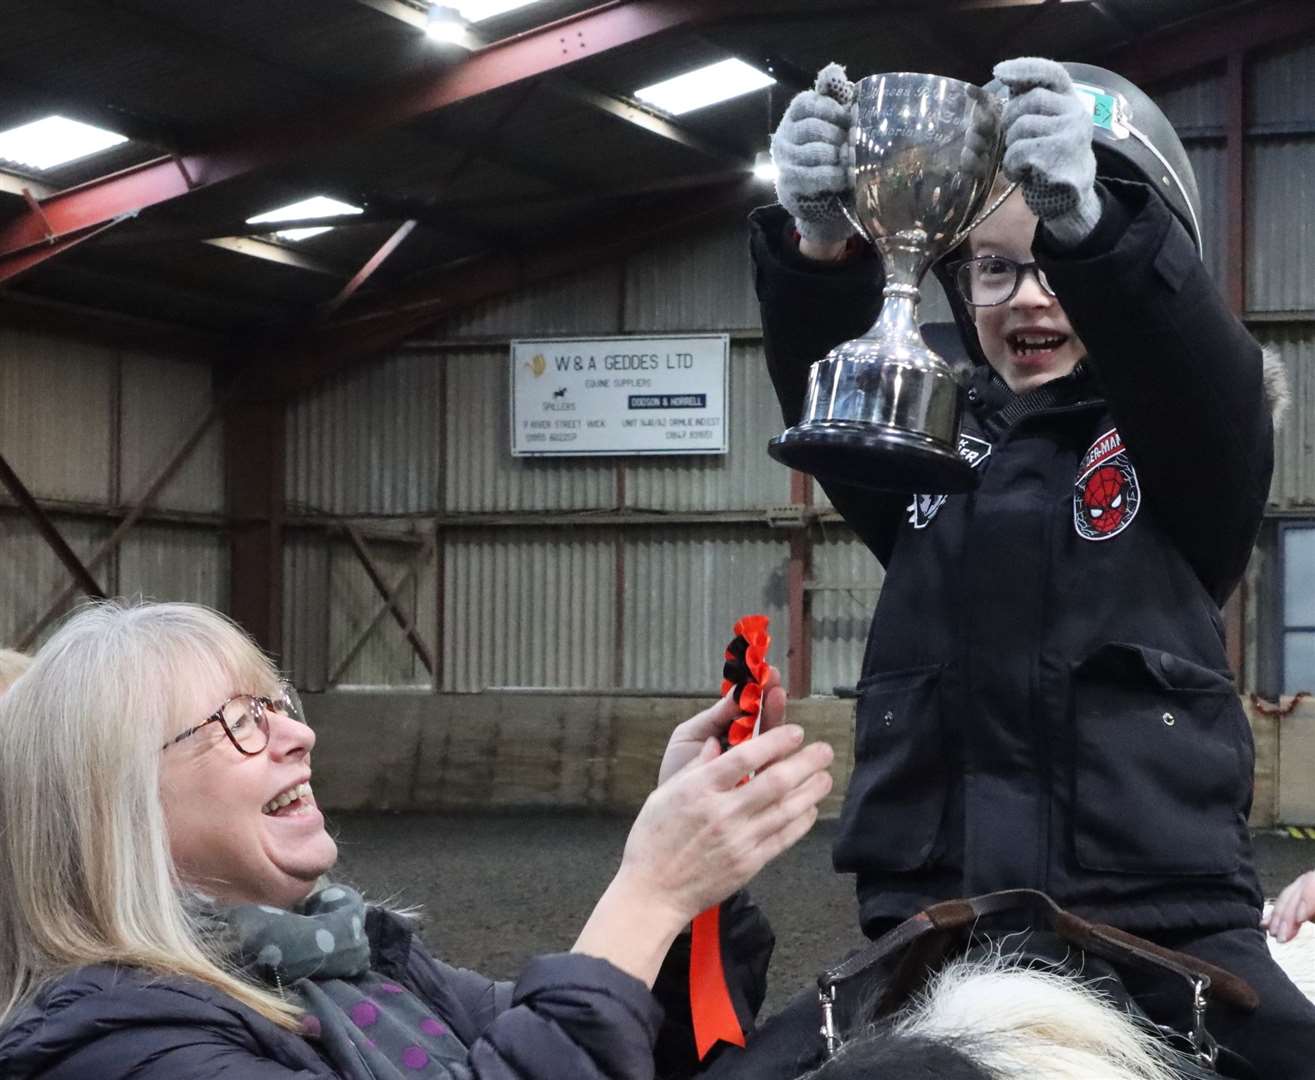 Kaiden Gunn received the Whitefield Lady Zena Cup for achievement (ride one). Picture: Neil Buchan